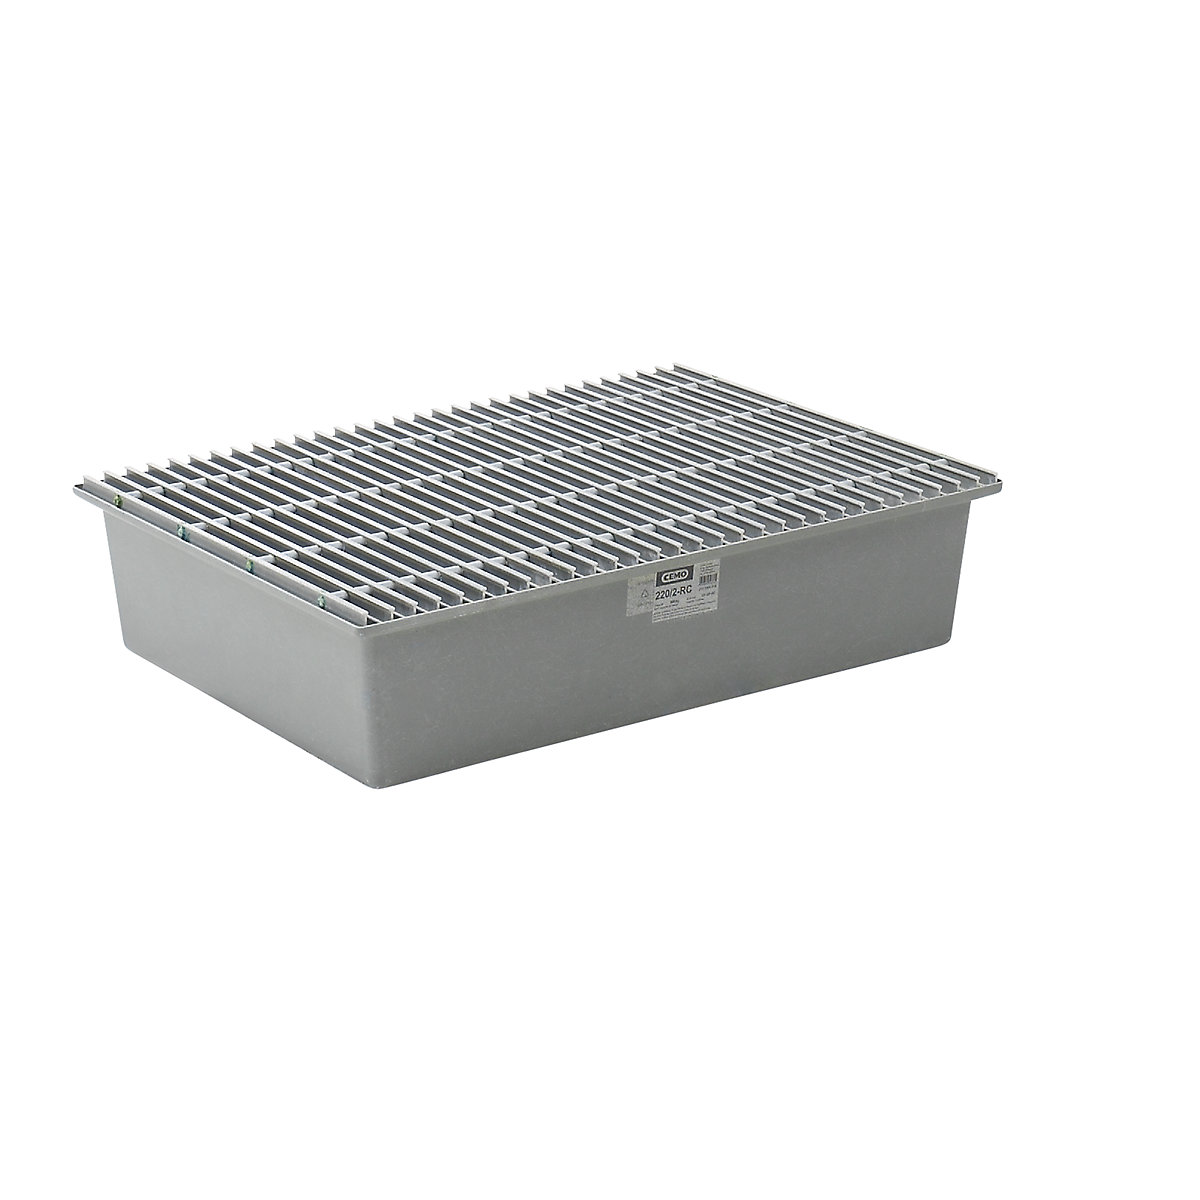 GRP base sump tray – CEMO, 2 x 200 litre drums, without certification, with GRP grate-4